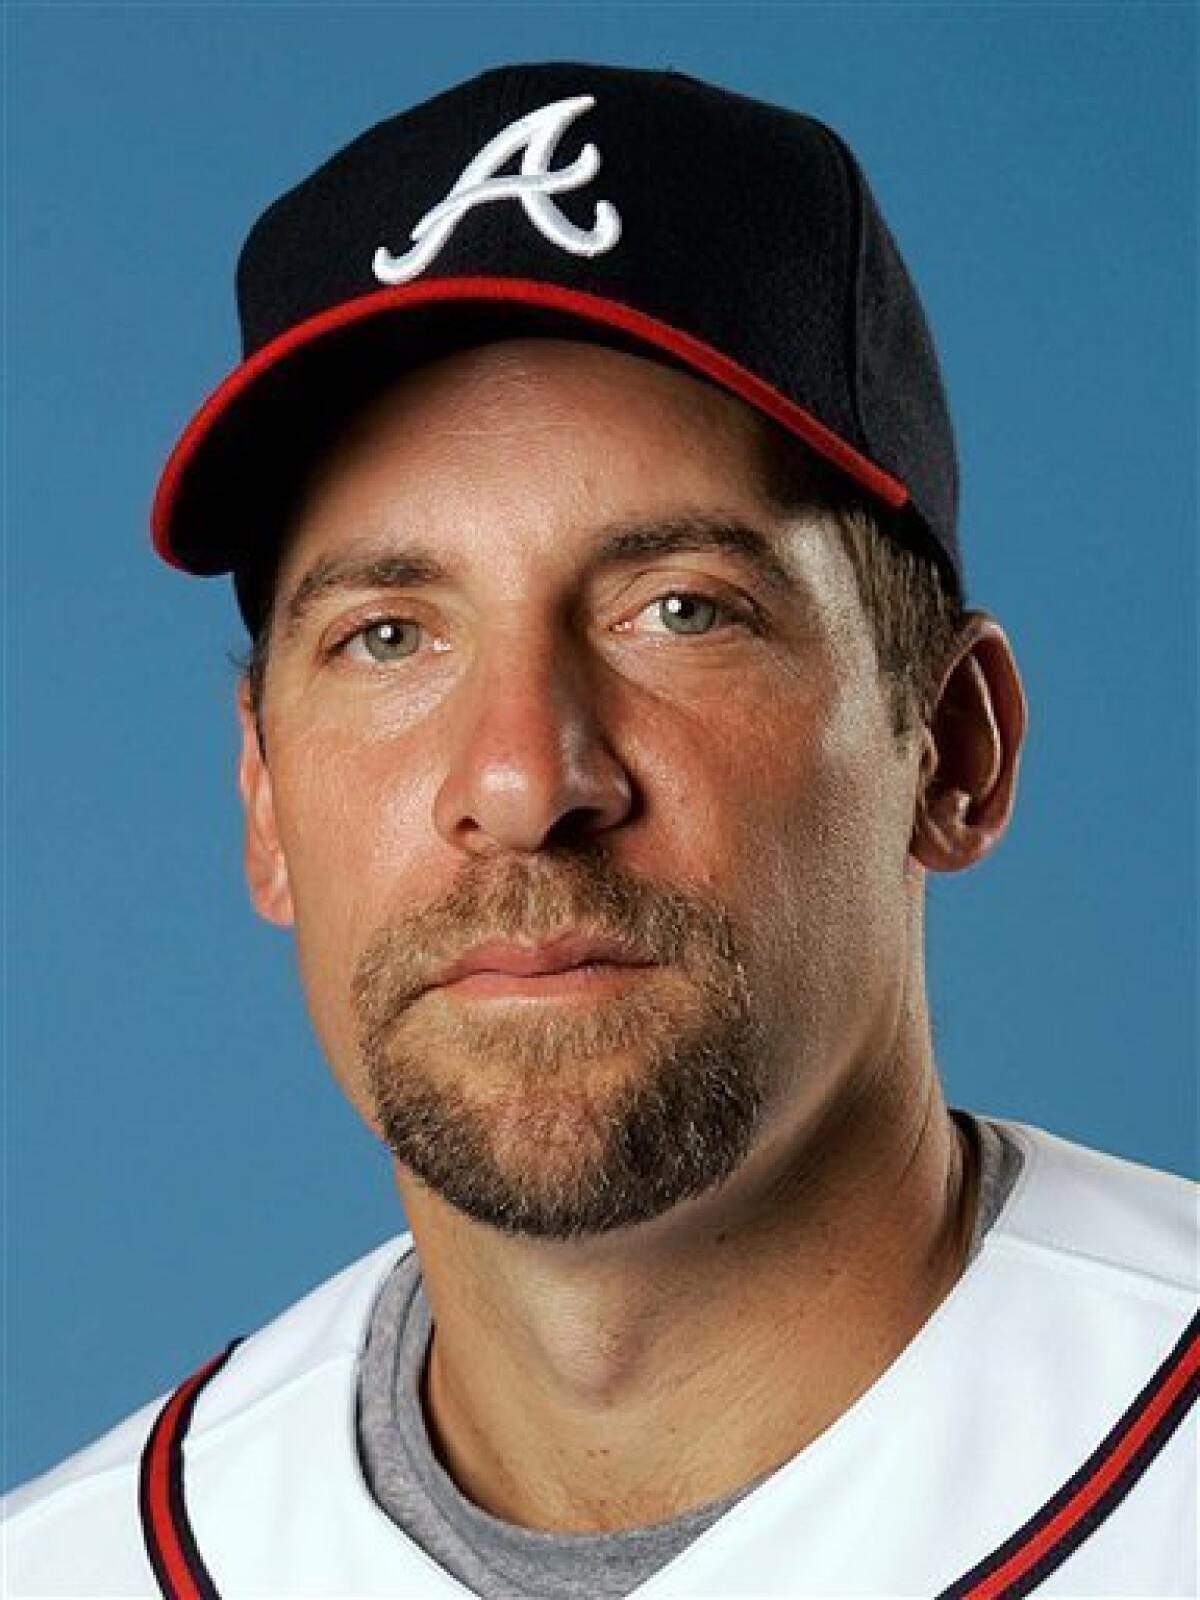 After surgery, Smoltz hopes to pitch again - The San Diego Union